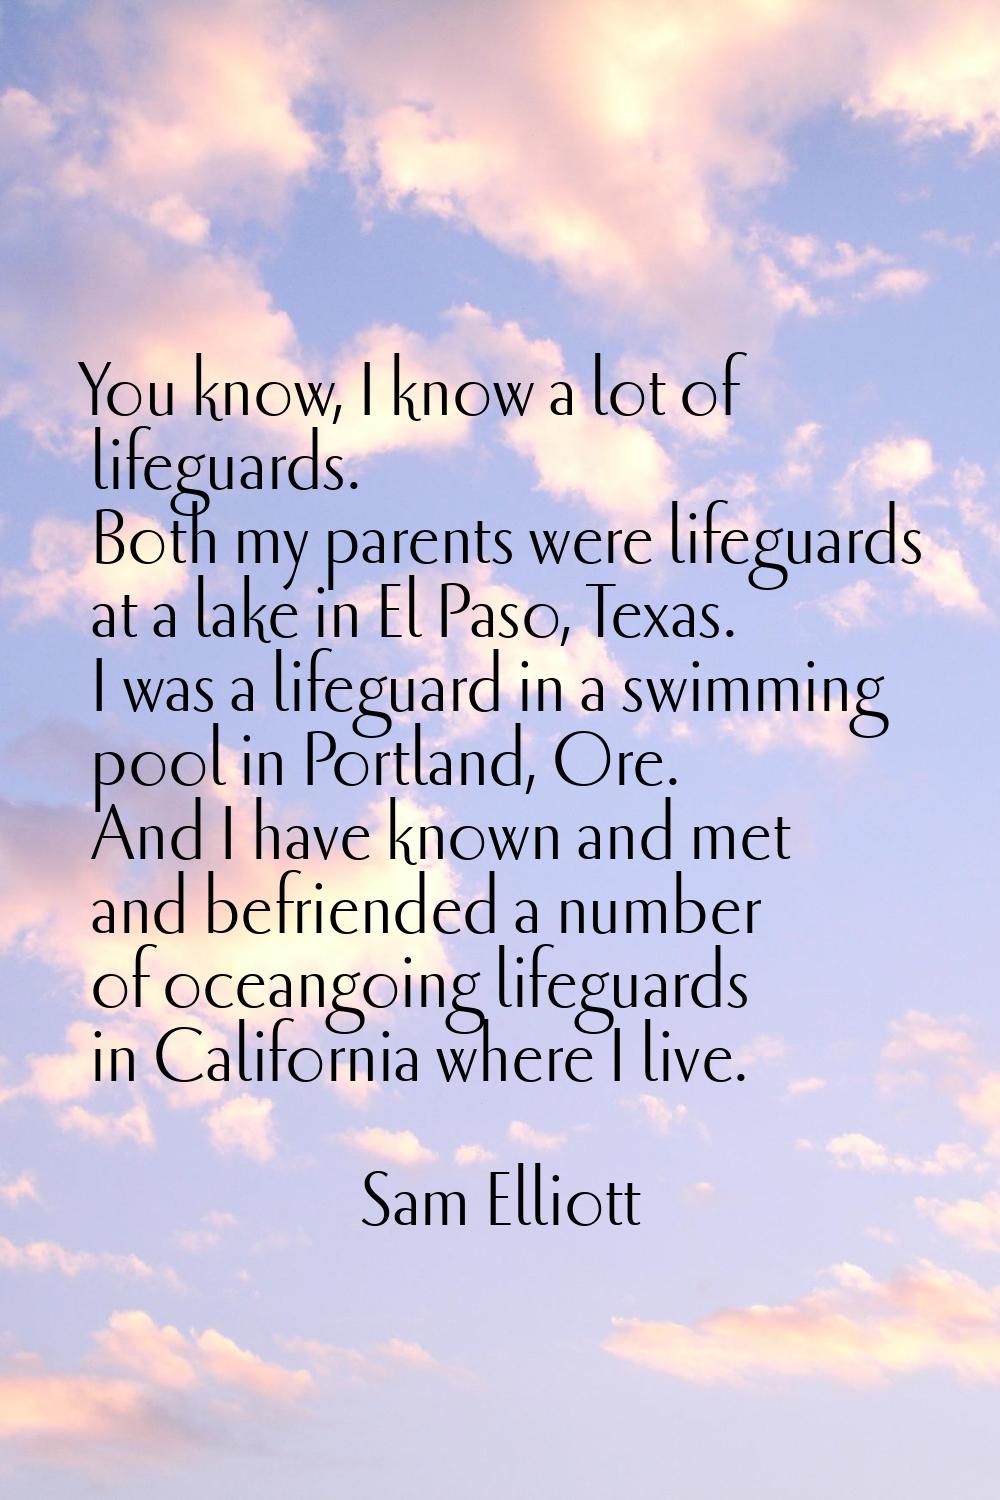 You know, I know a lot of lifeguards. Both my parents were lifeguards at a lake in El Paso, Texas. 